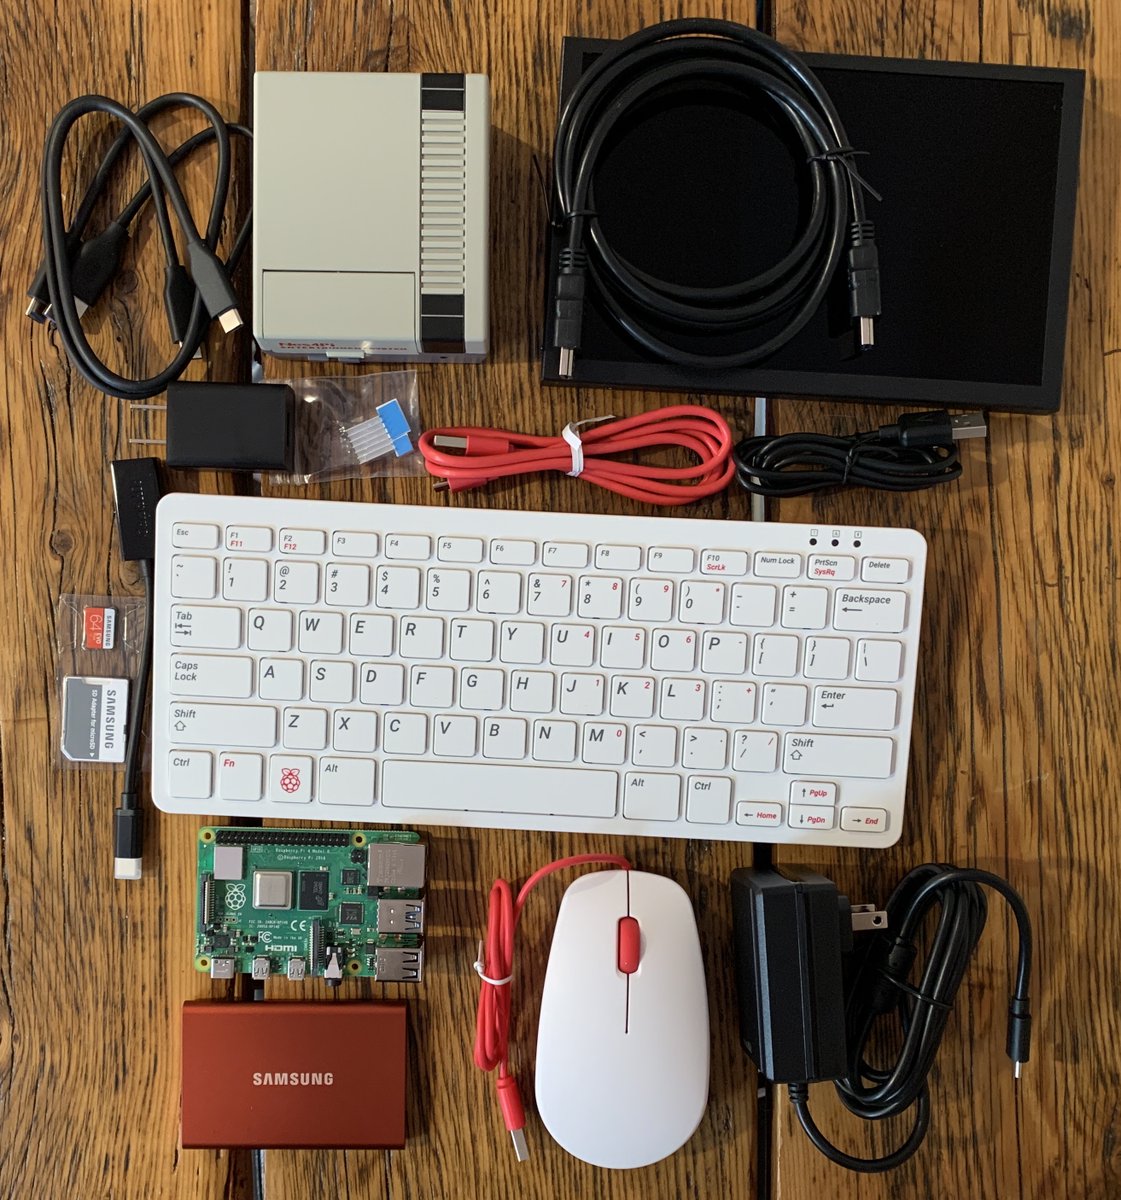 5/56 Before getting into the wallet’s features & tools, the Dojo full node needs to be set up on a single board computer (SBC). I chose a RasPi4, but consider using the RockPro64 for the smoothest set up. PC also required for the RoninUI. https://wiki.ronindojo.io/en/hardware 